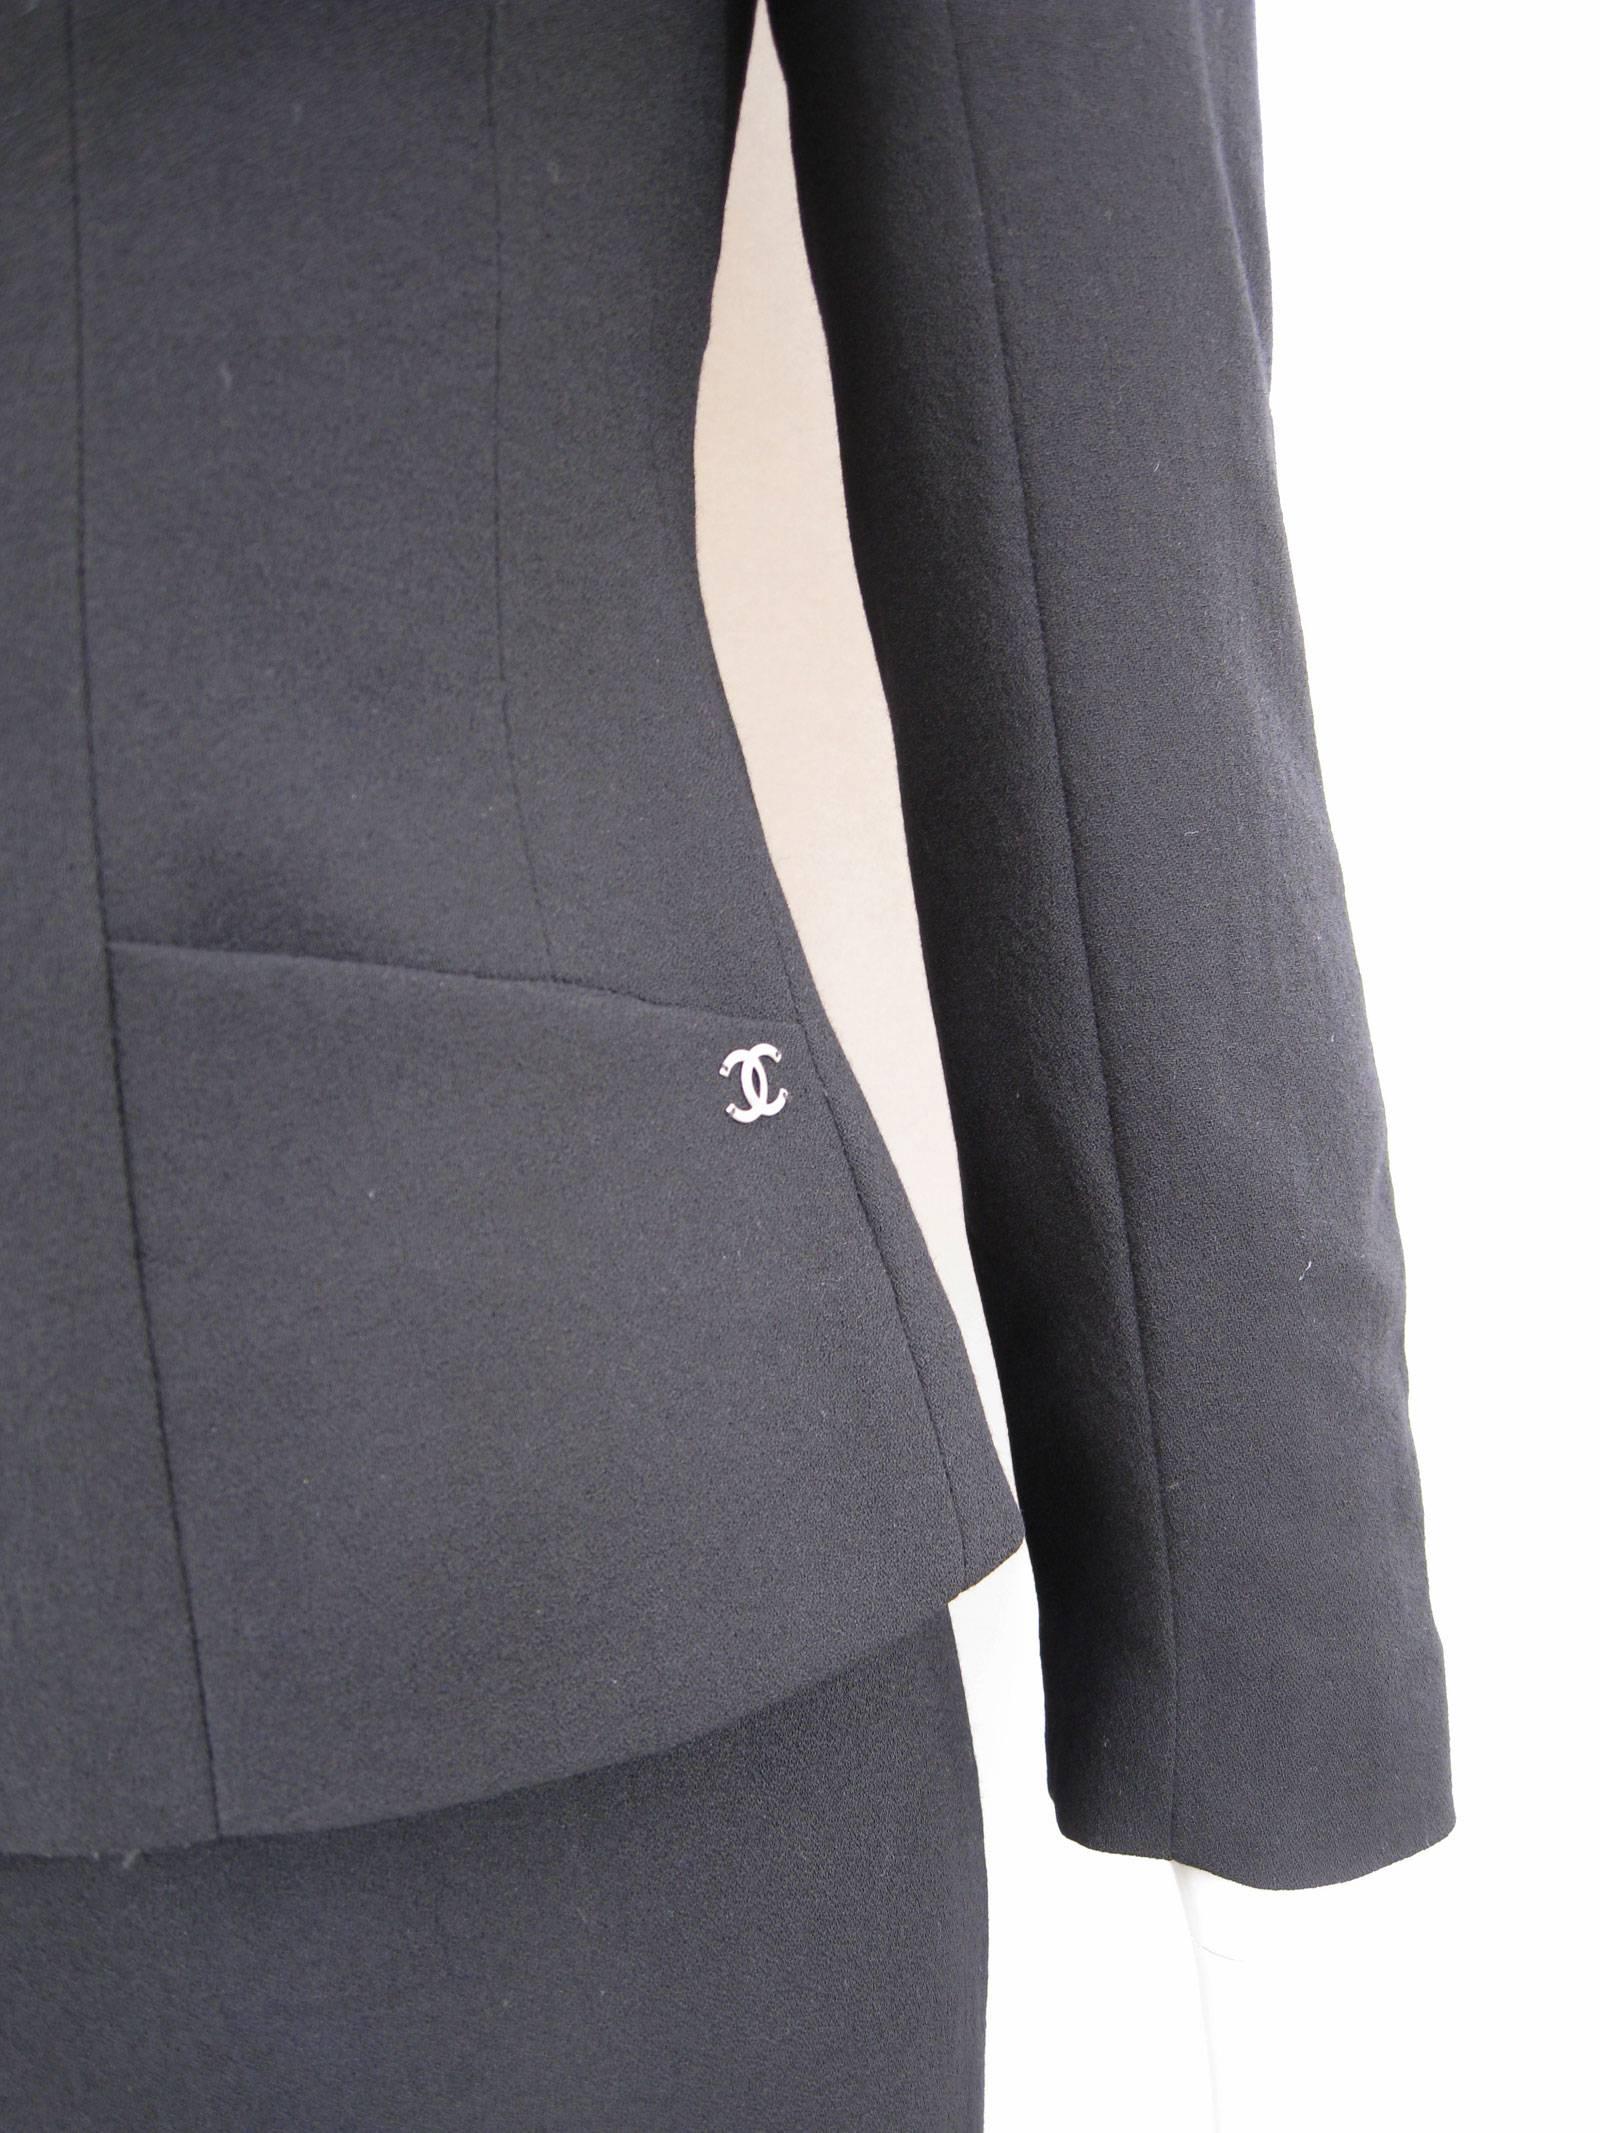 Chanel Classic Lightweight Black Wool Pant Suit 1